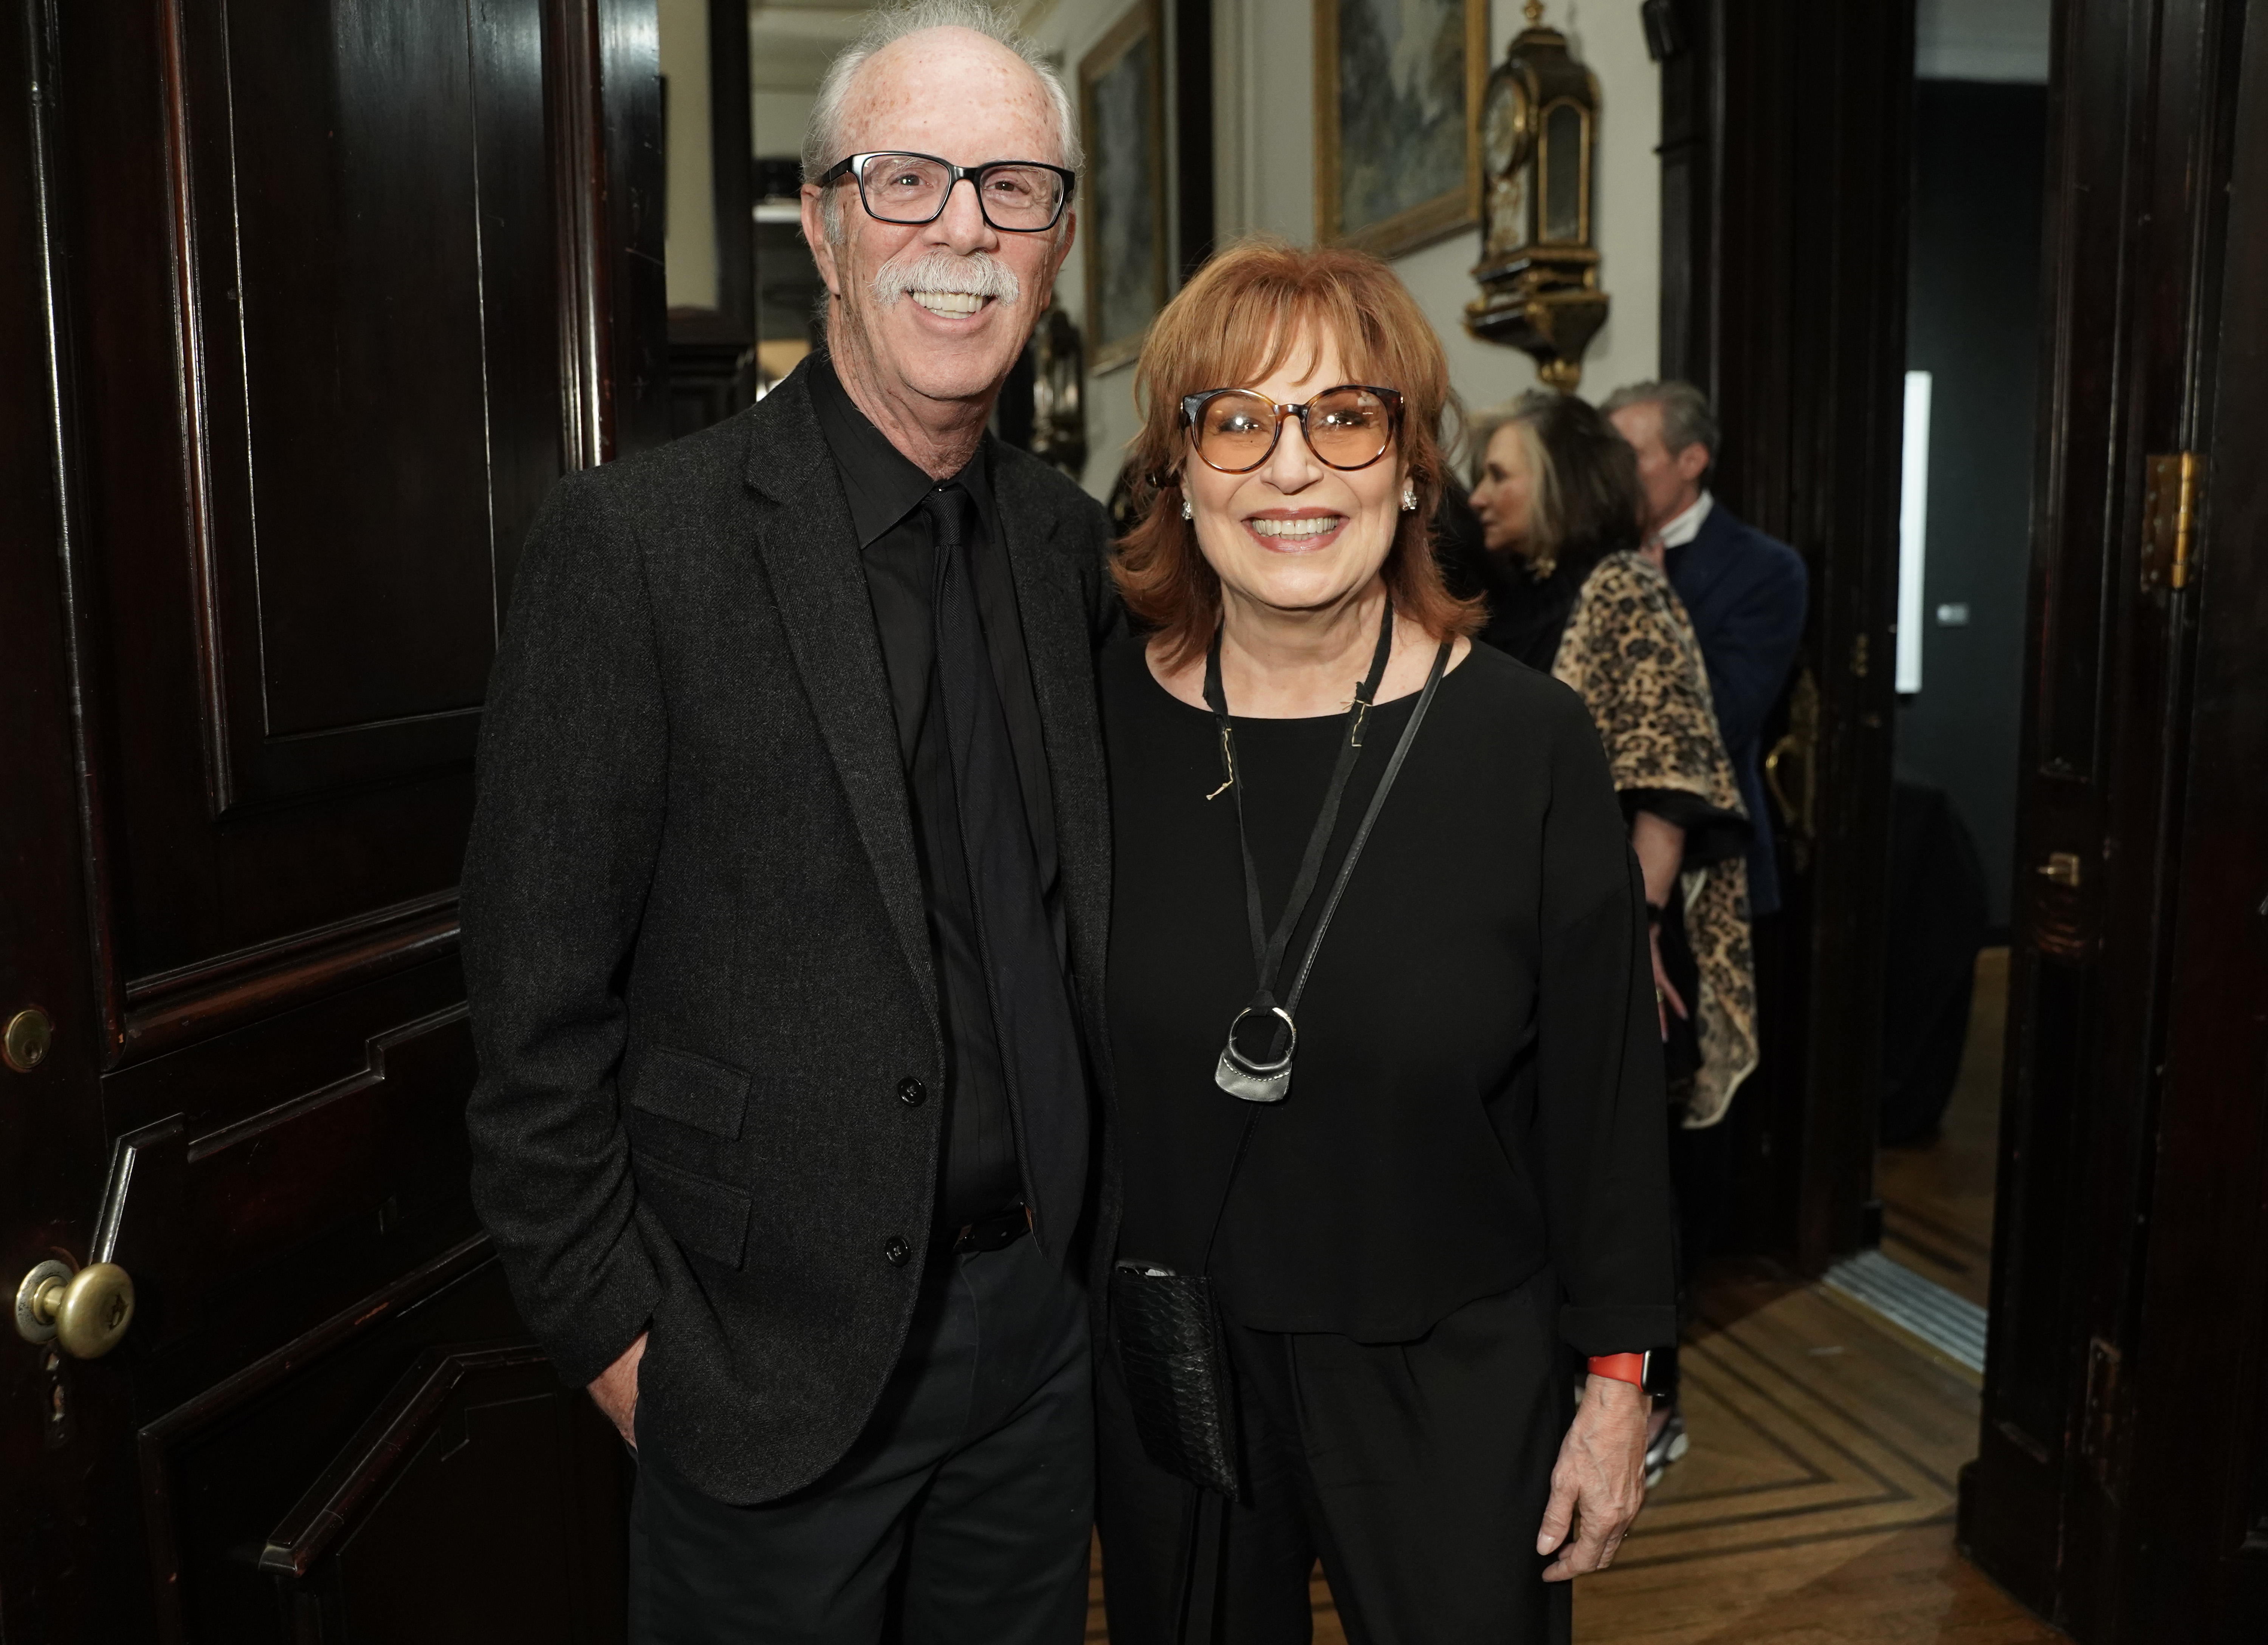 Steve Janowitz and Joy Behar at the Joseph Fioretti exhibition at The National Arts Club on October 5, 2019 in New York City | Source: Getty Images